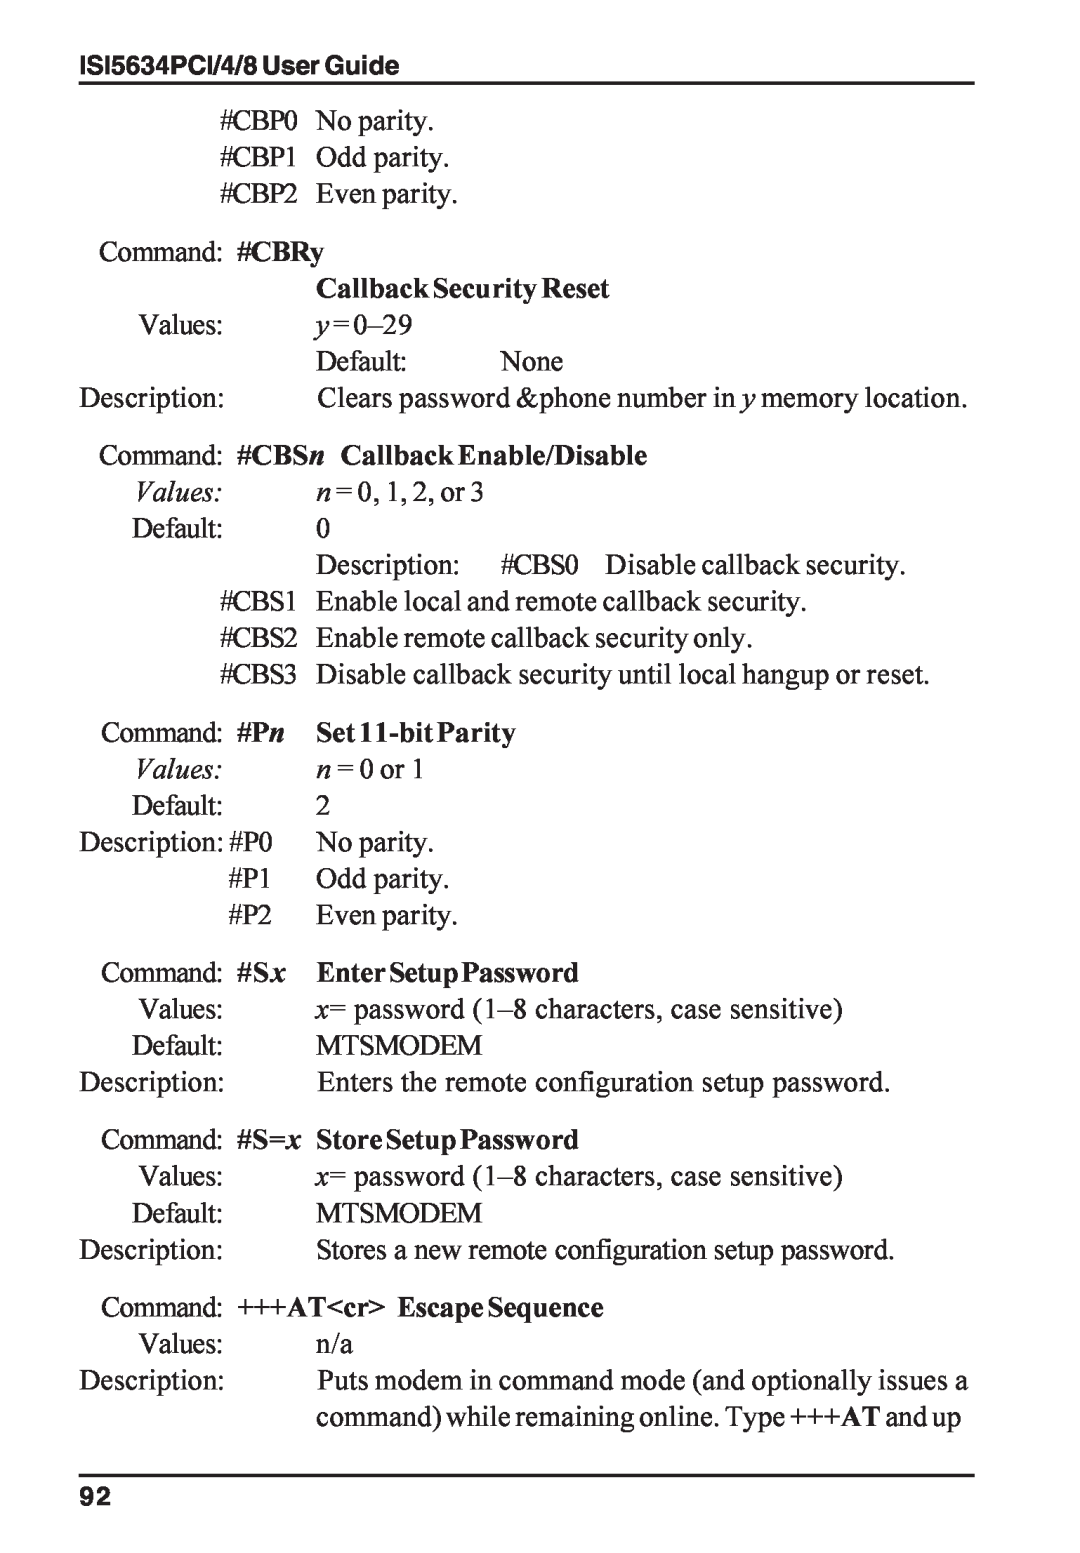 Multi-Tech Systems ISI5634PCI/4/8 manual Callback Security Reset, Command #CBSn Callback Enable/Disable, Set 11-bit Parity 